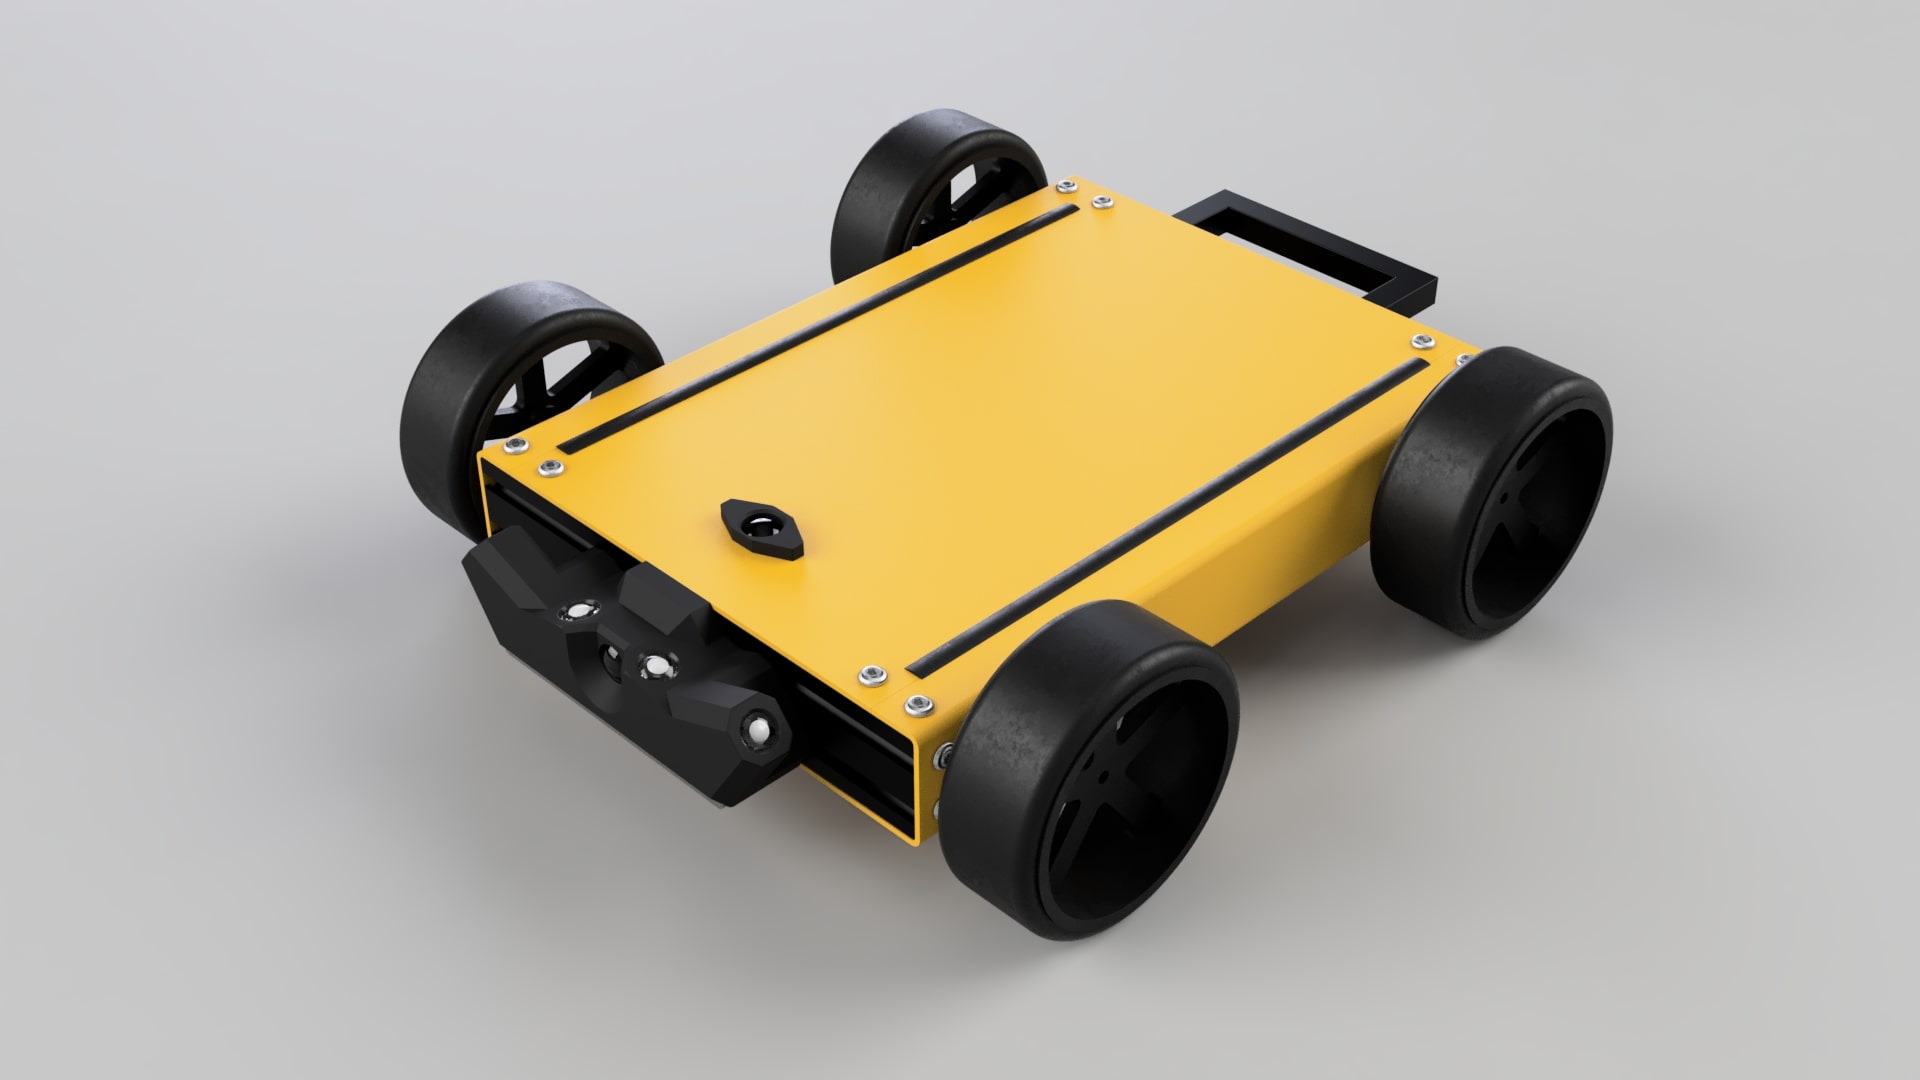 #Hades-5S Under vehicle inspection robot